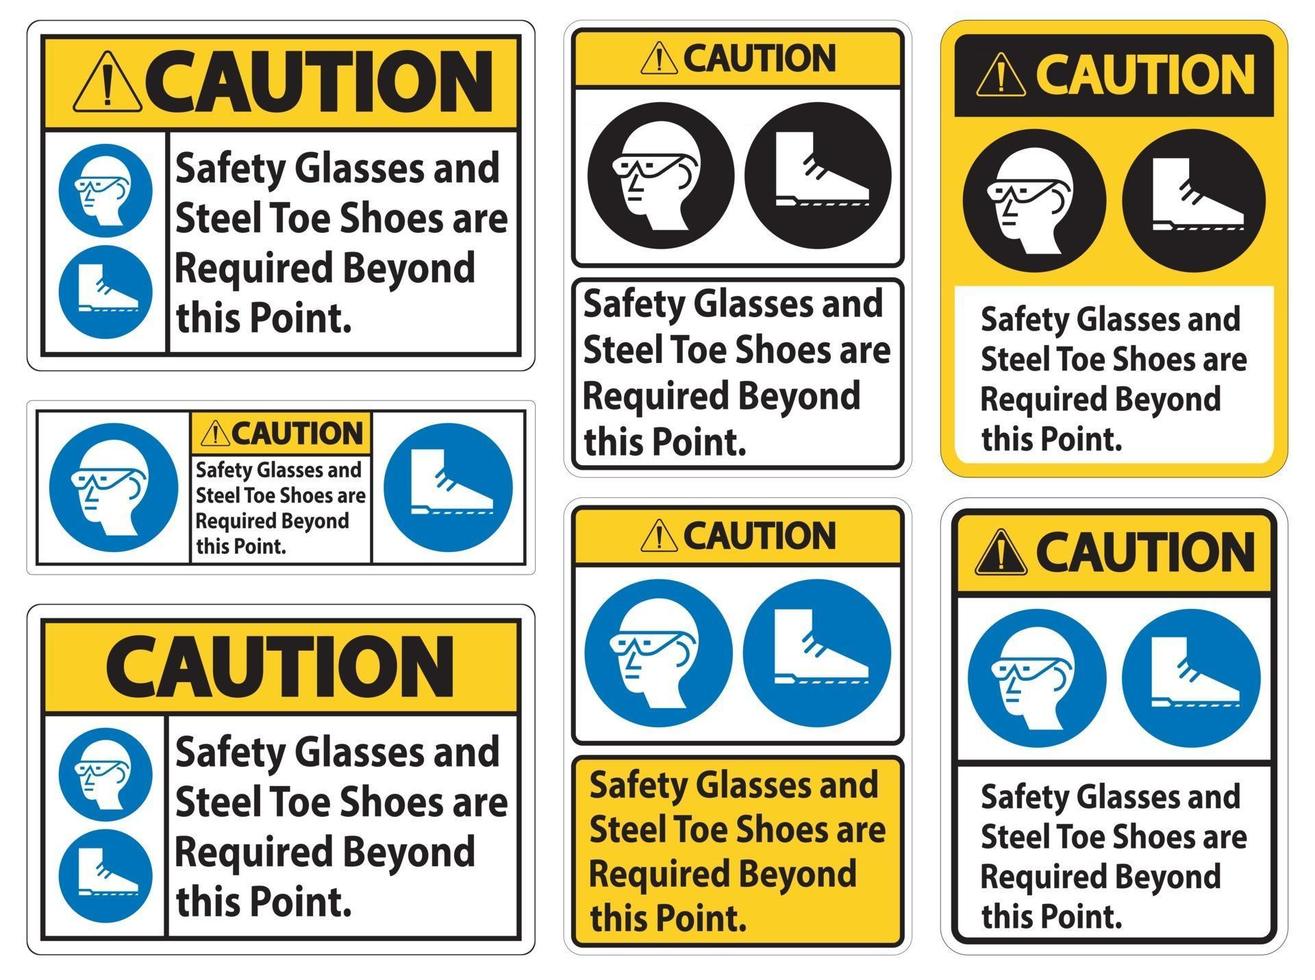 Caution Safety Glasses And Steel Toe Shoes Are Required Beyond This Point vector